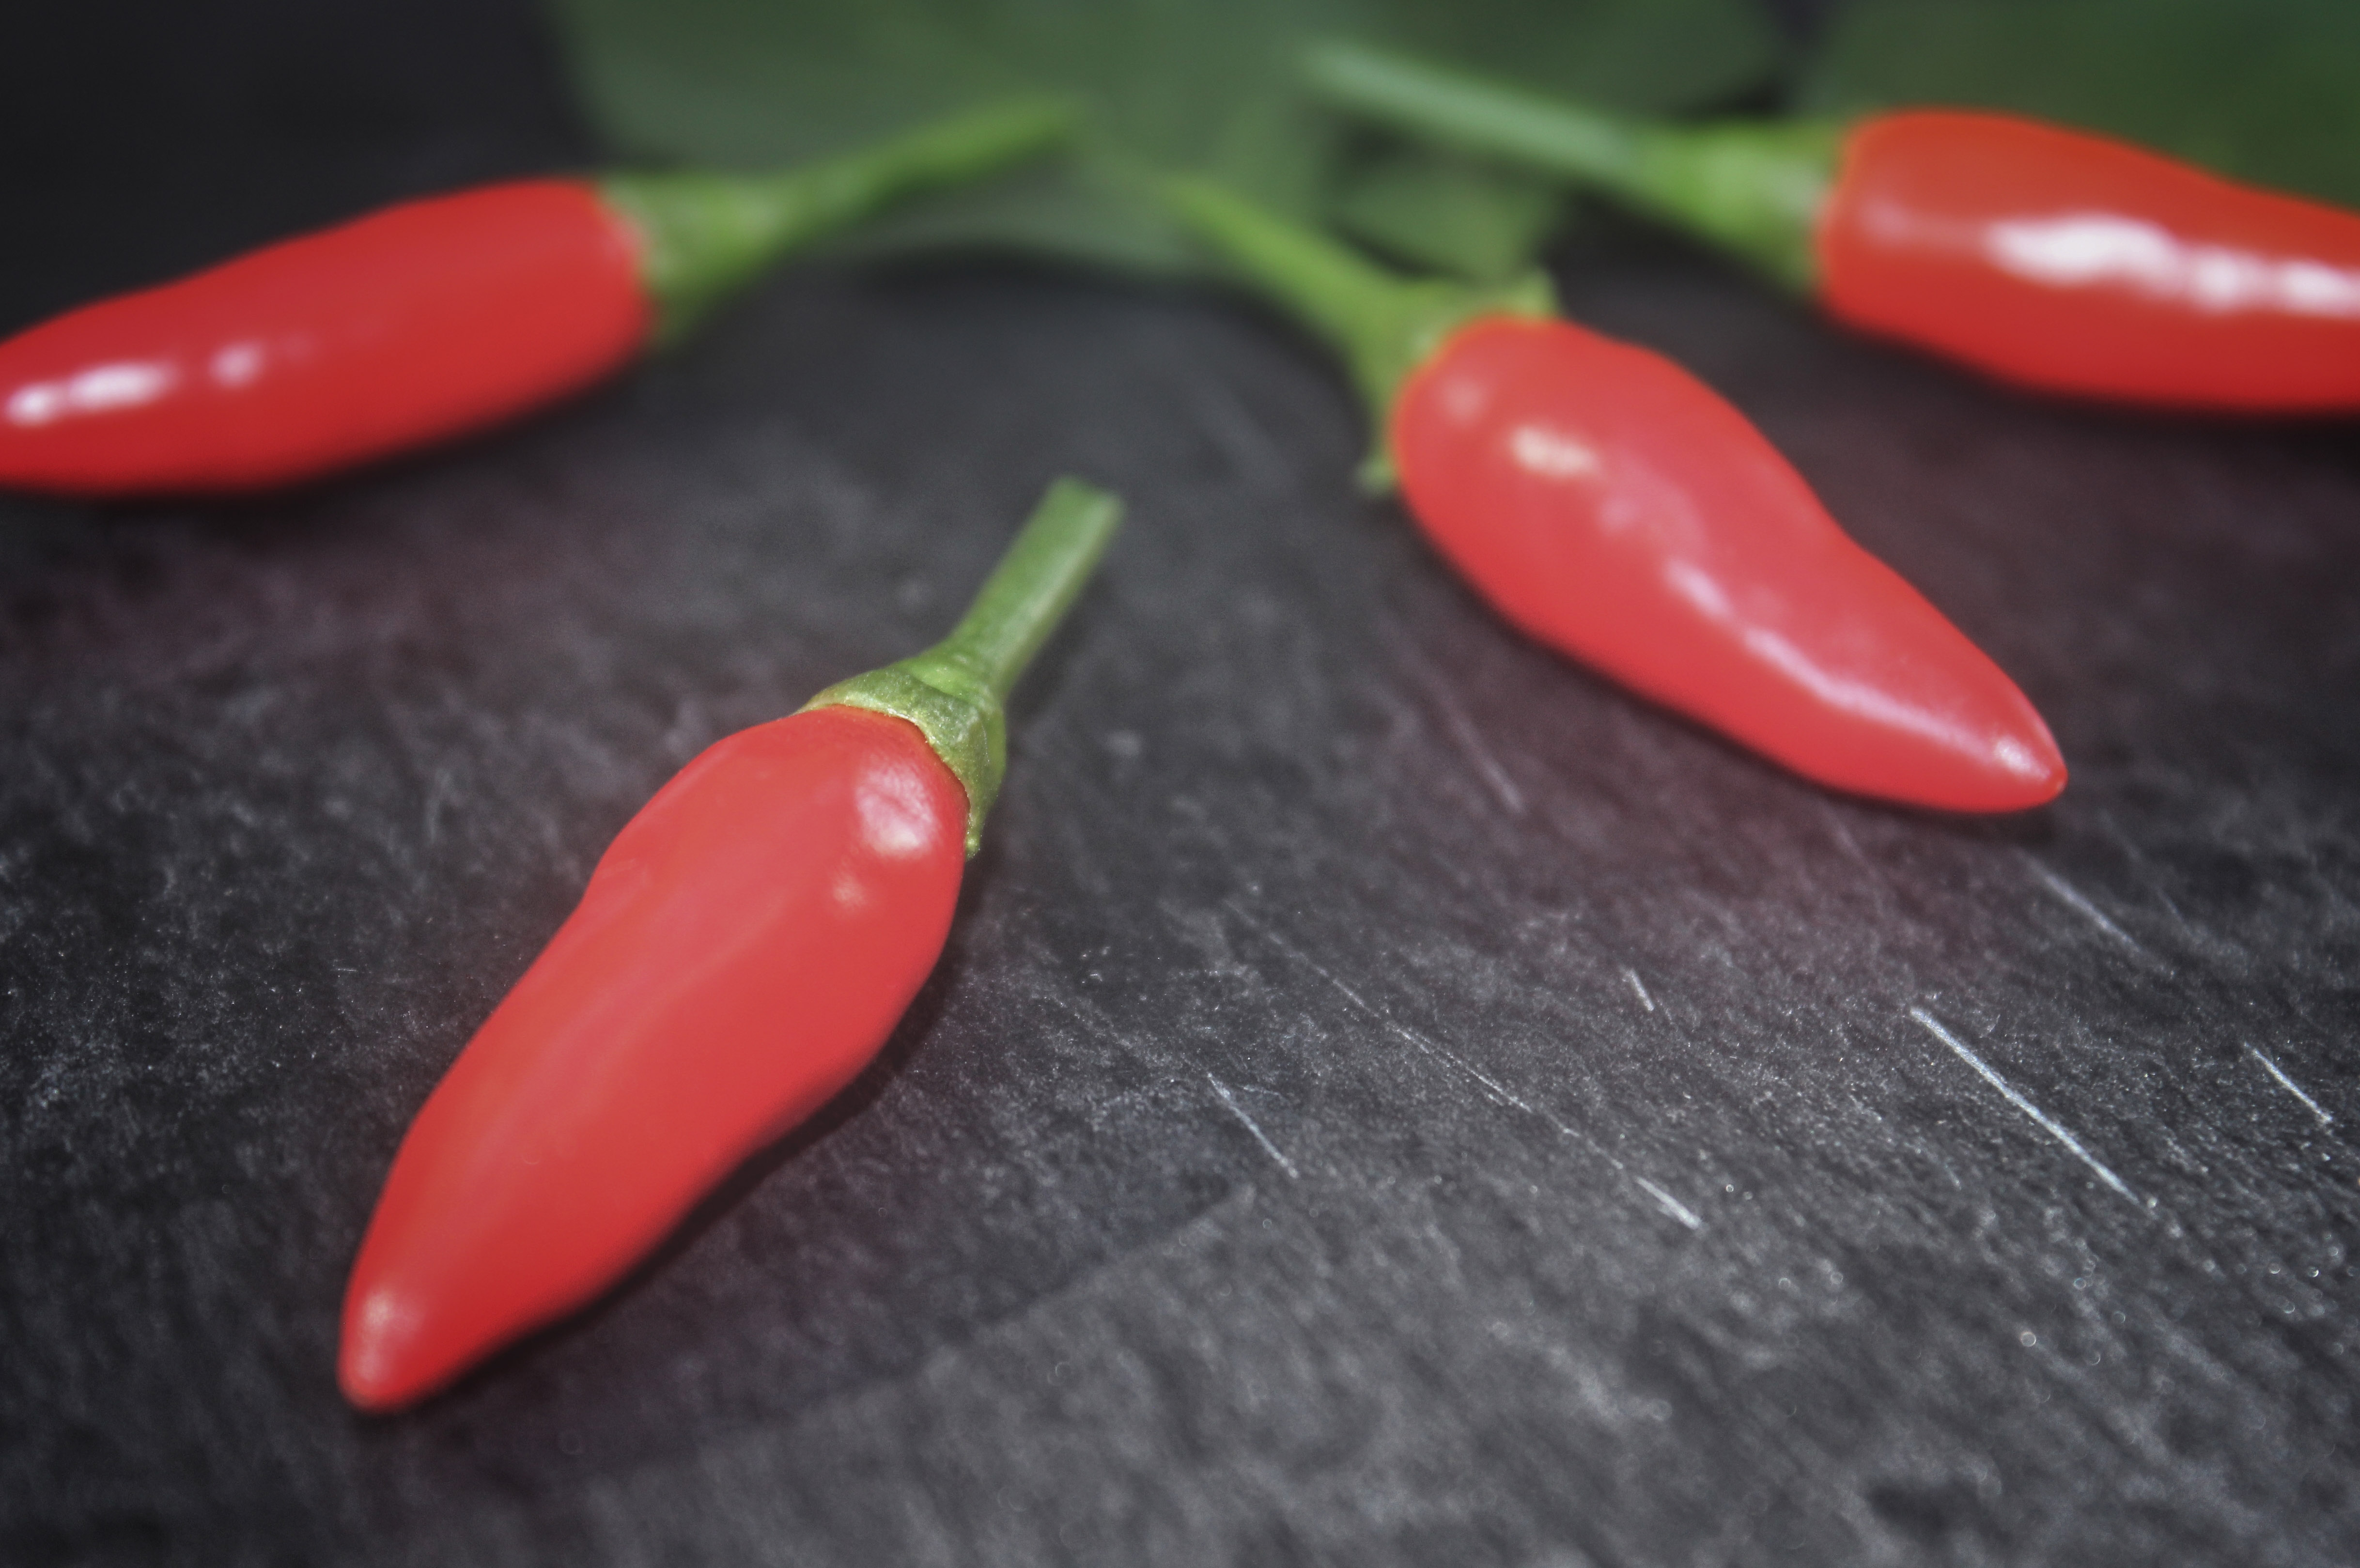 Red chilli peppers - close-up photo